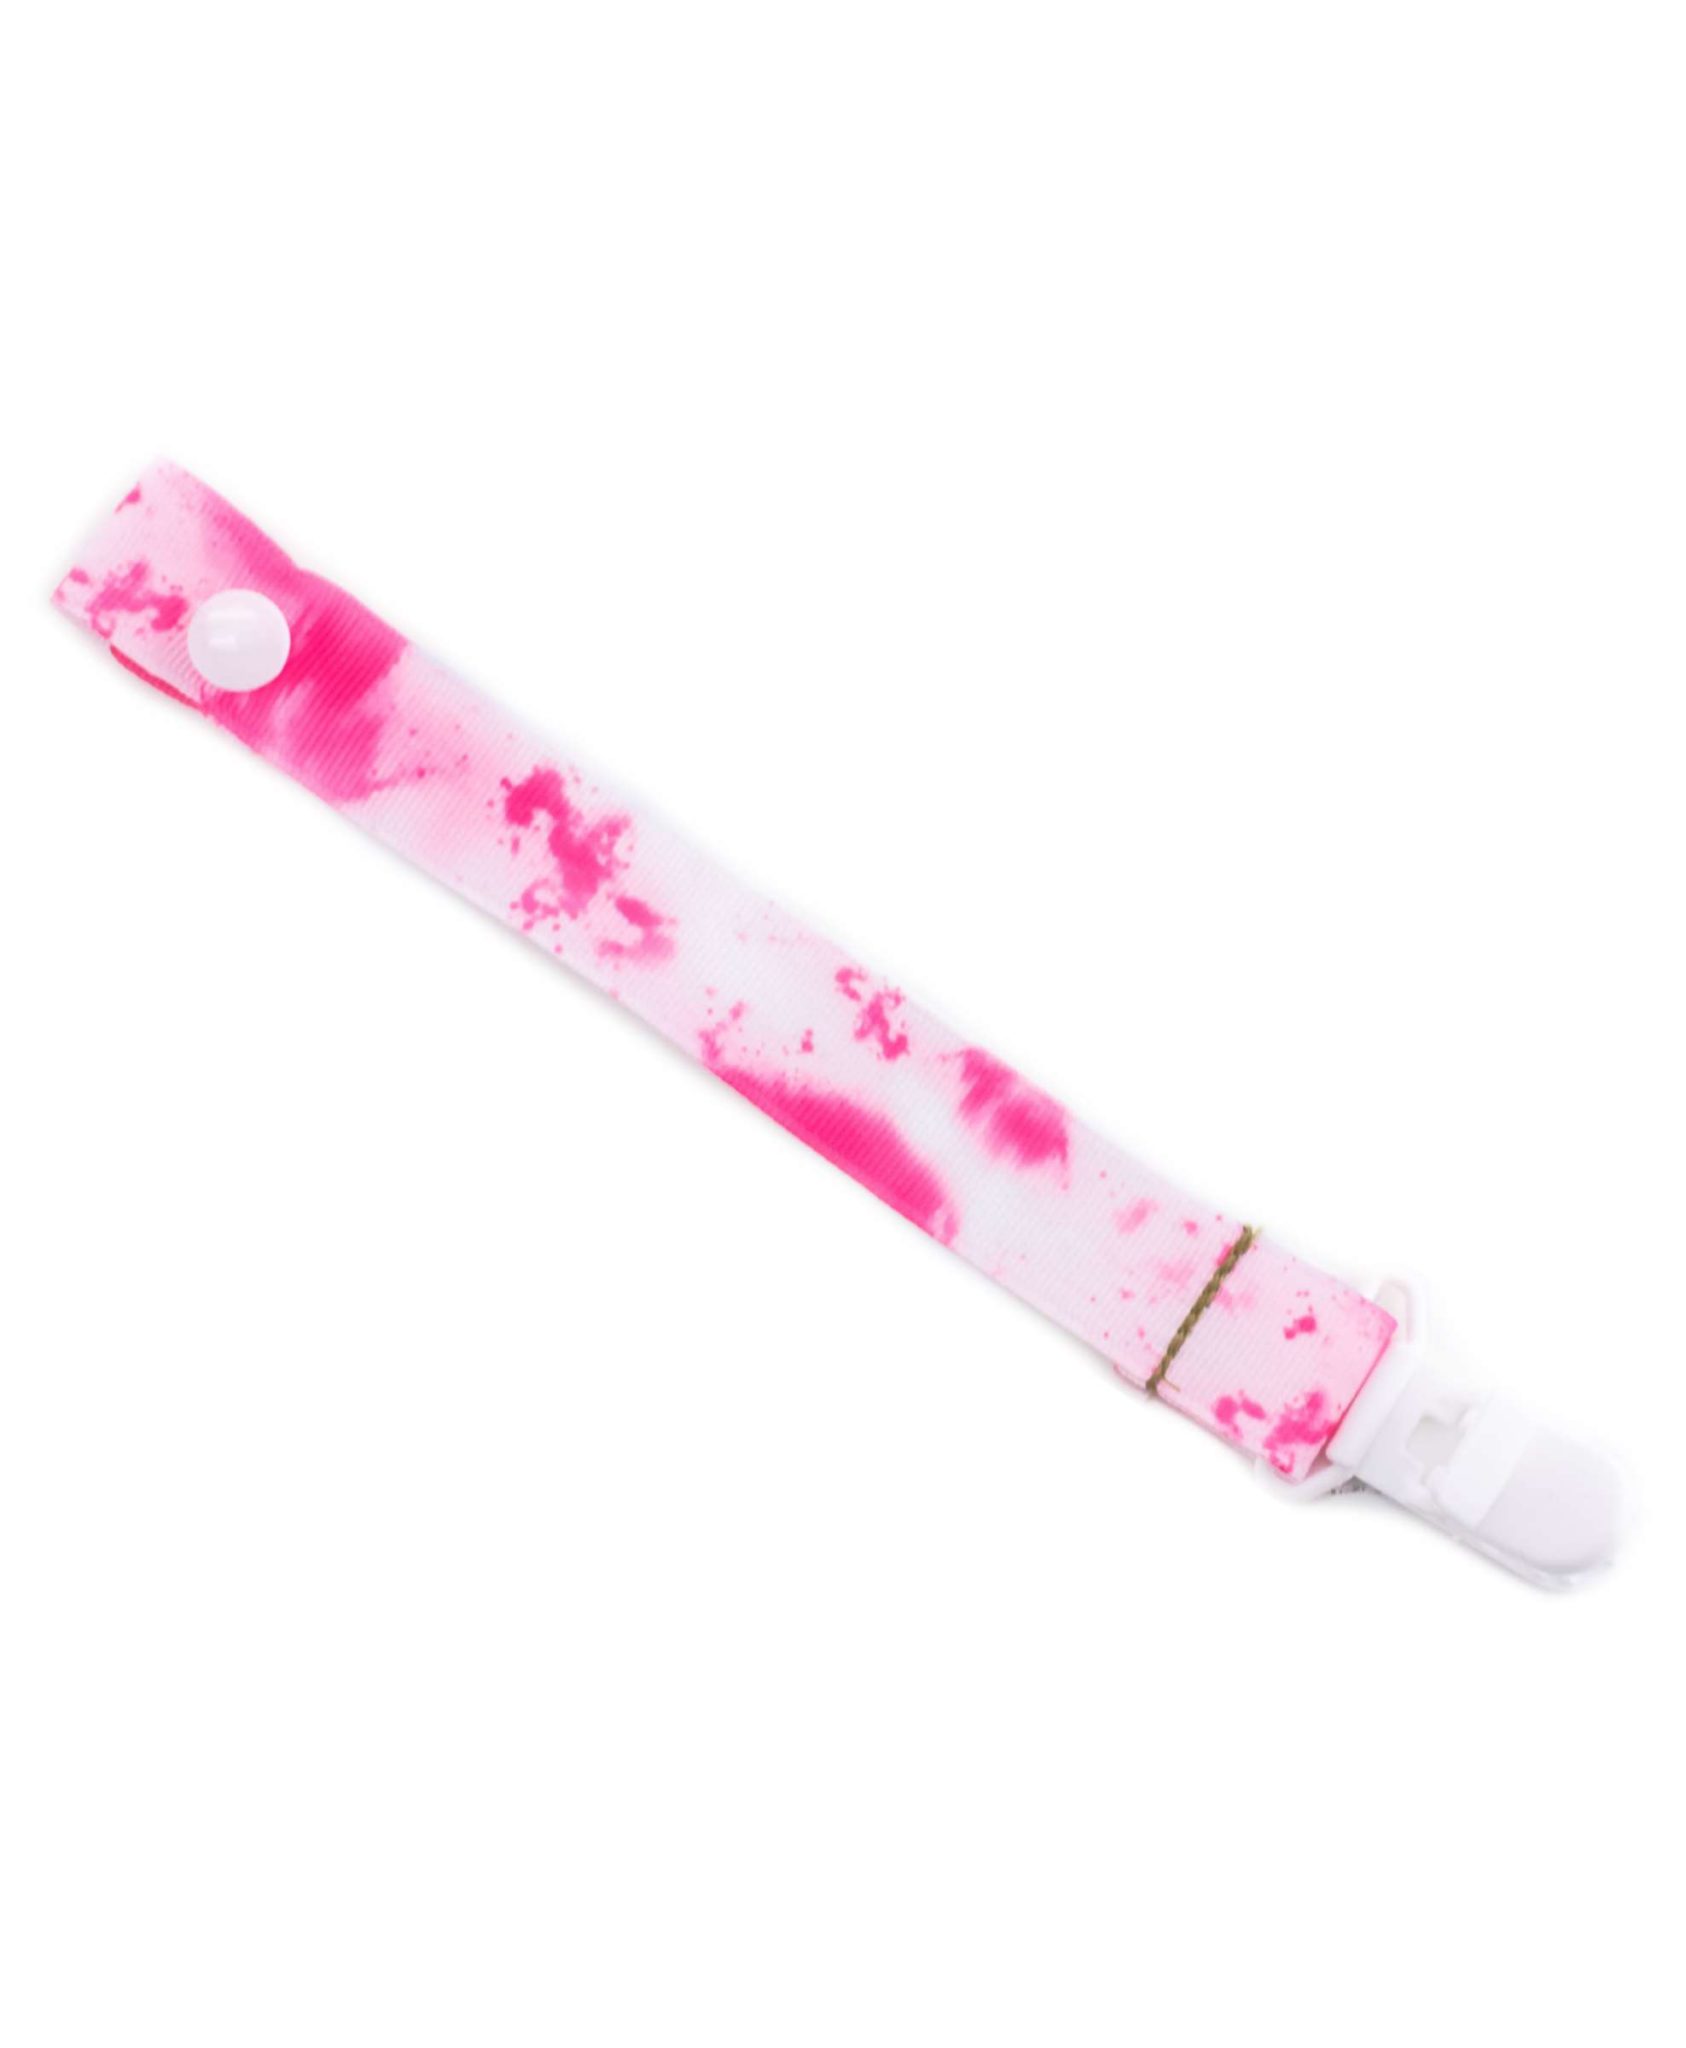 Pink-Tie-Dye-dummy-pacifier-clip-saver-baby-ACCC-Compliant